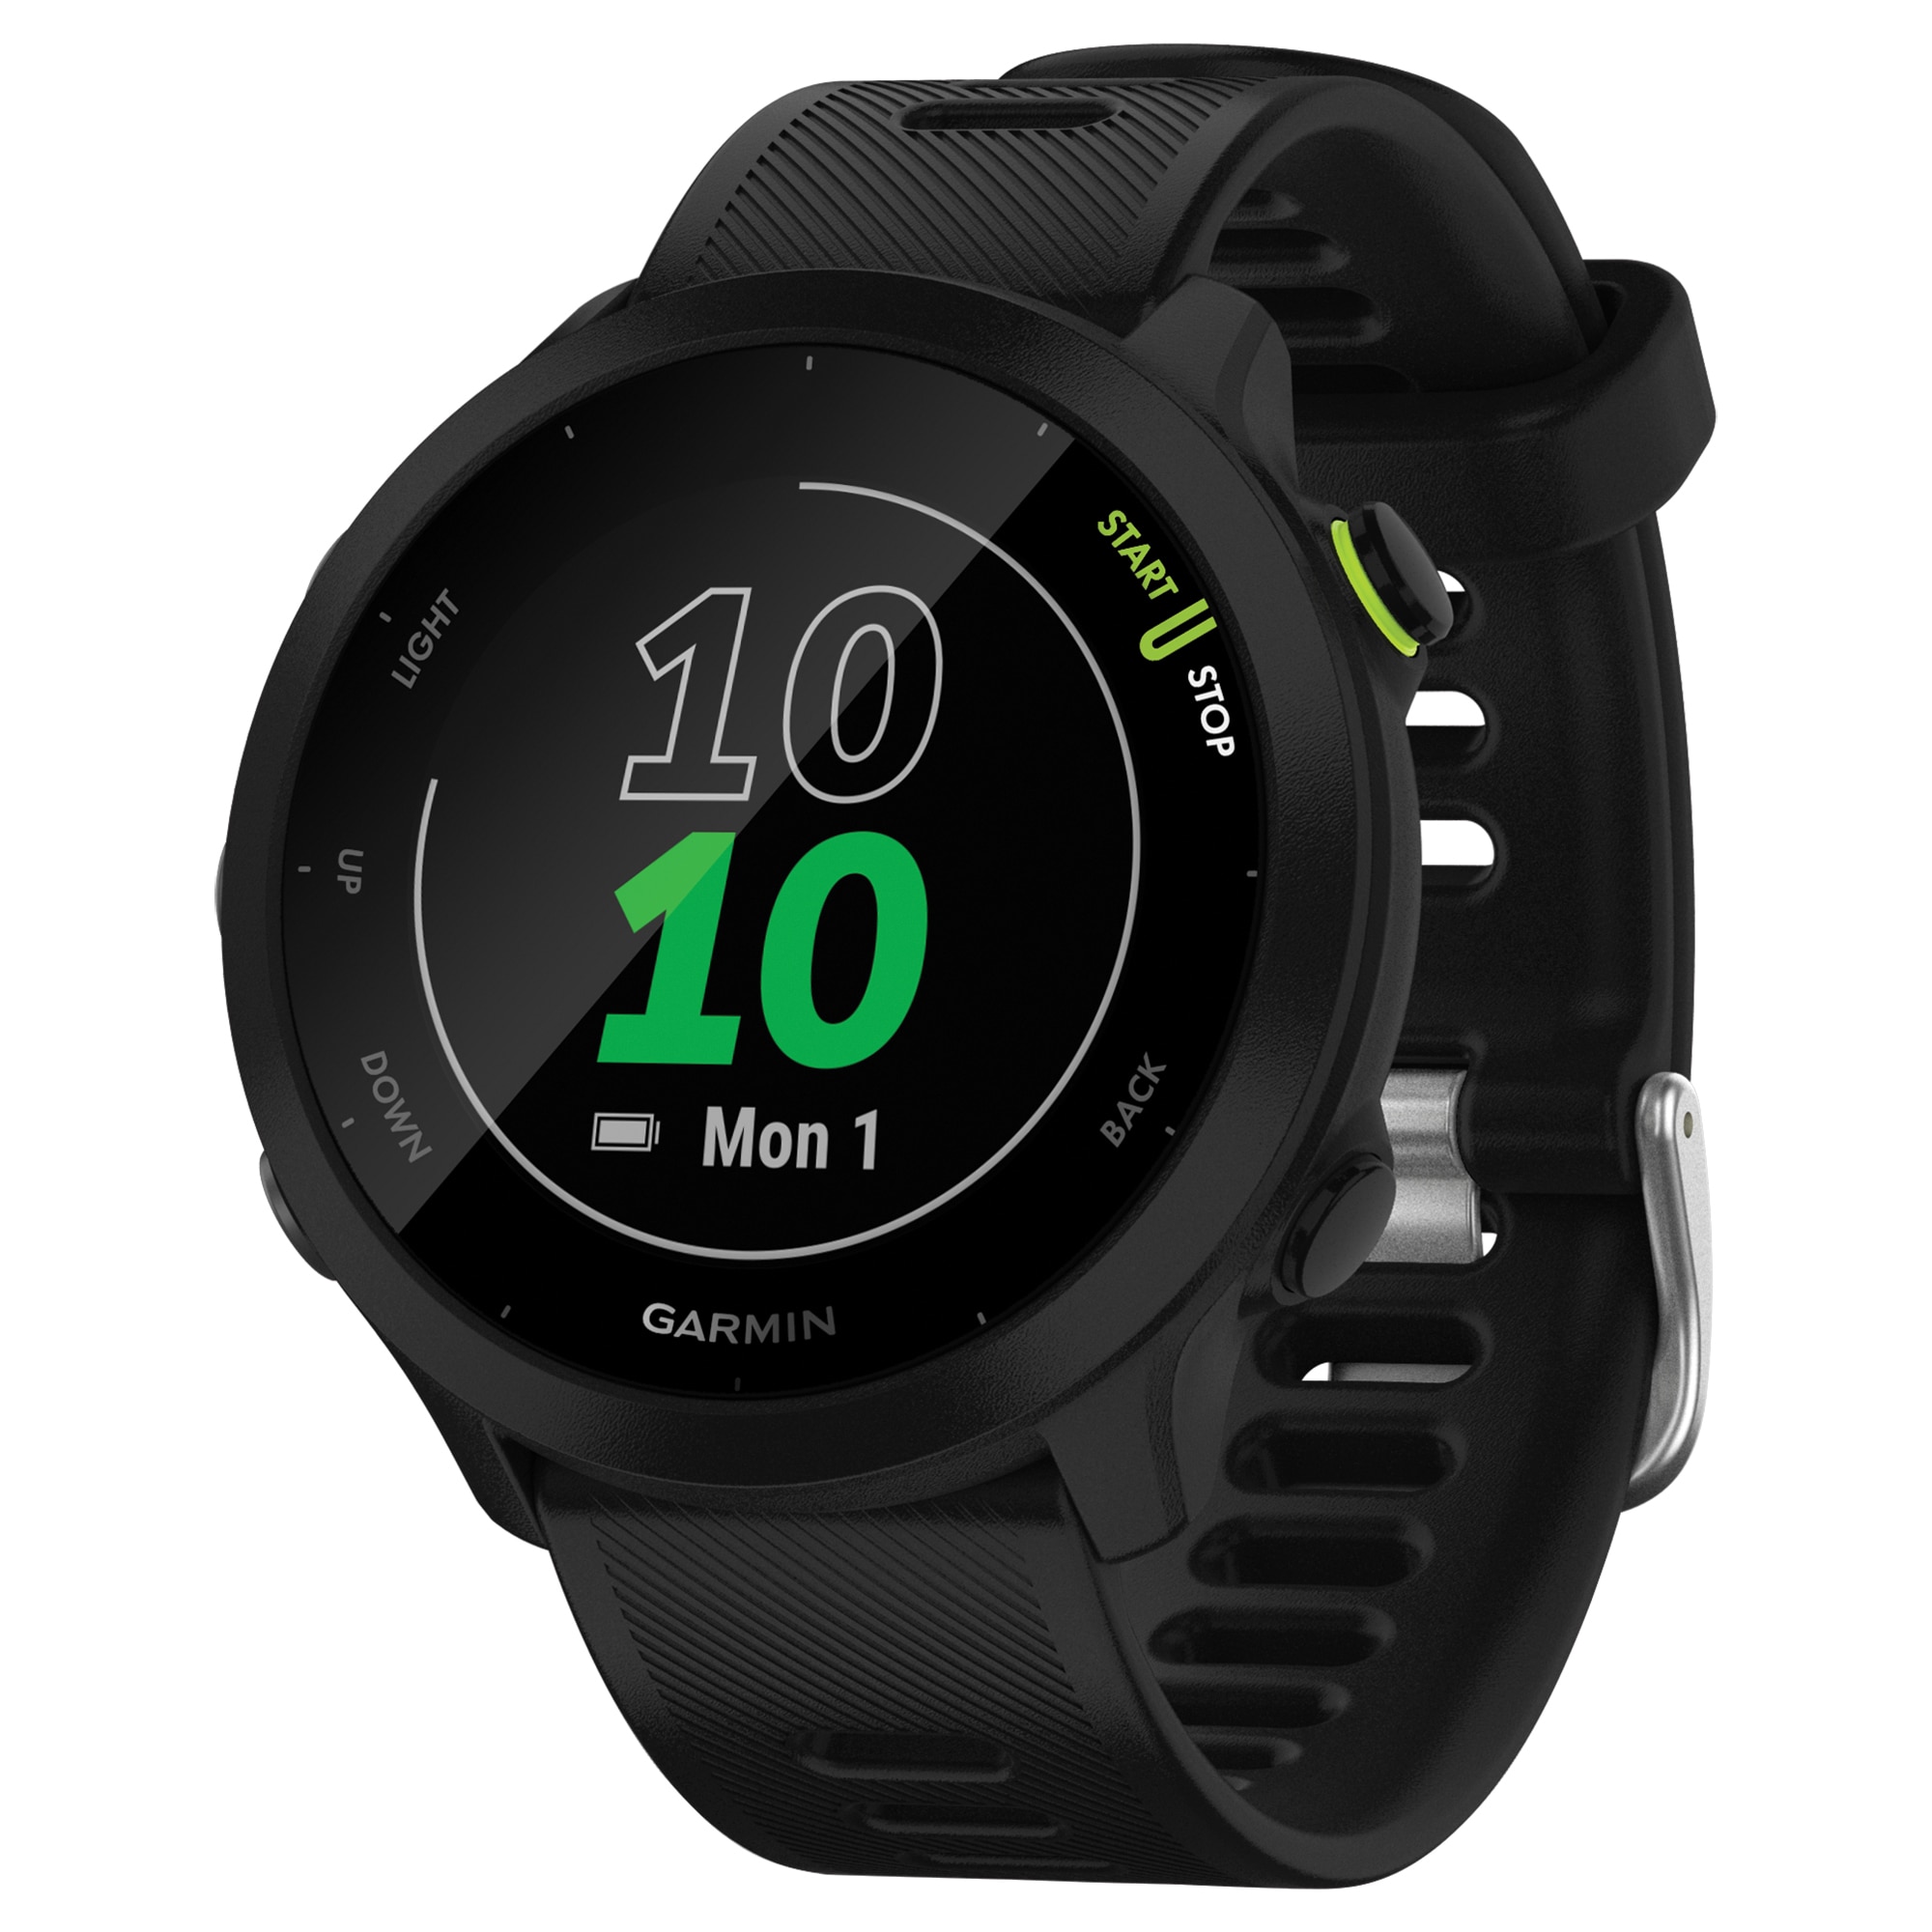 Don't hold your breath for the Garmin Forerunner 255 – we don't really need  it